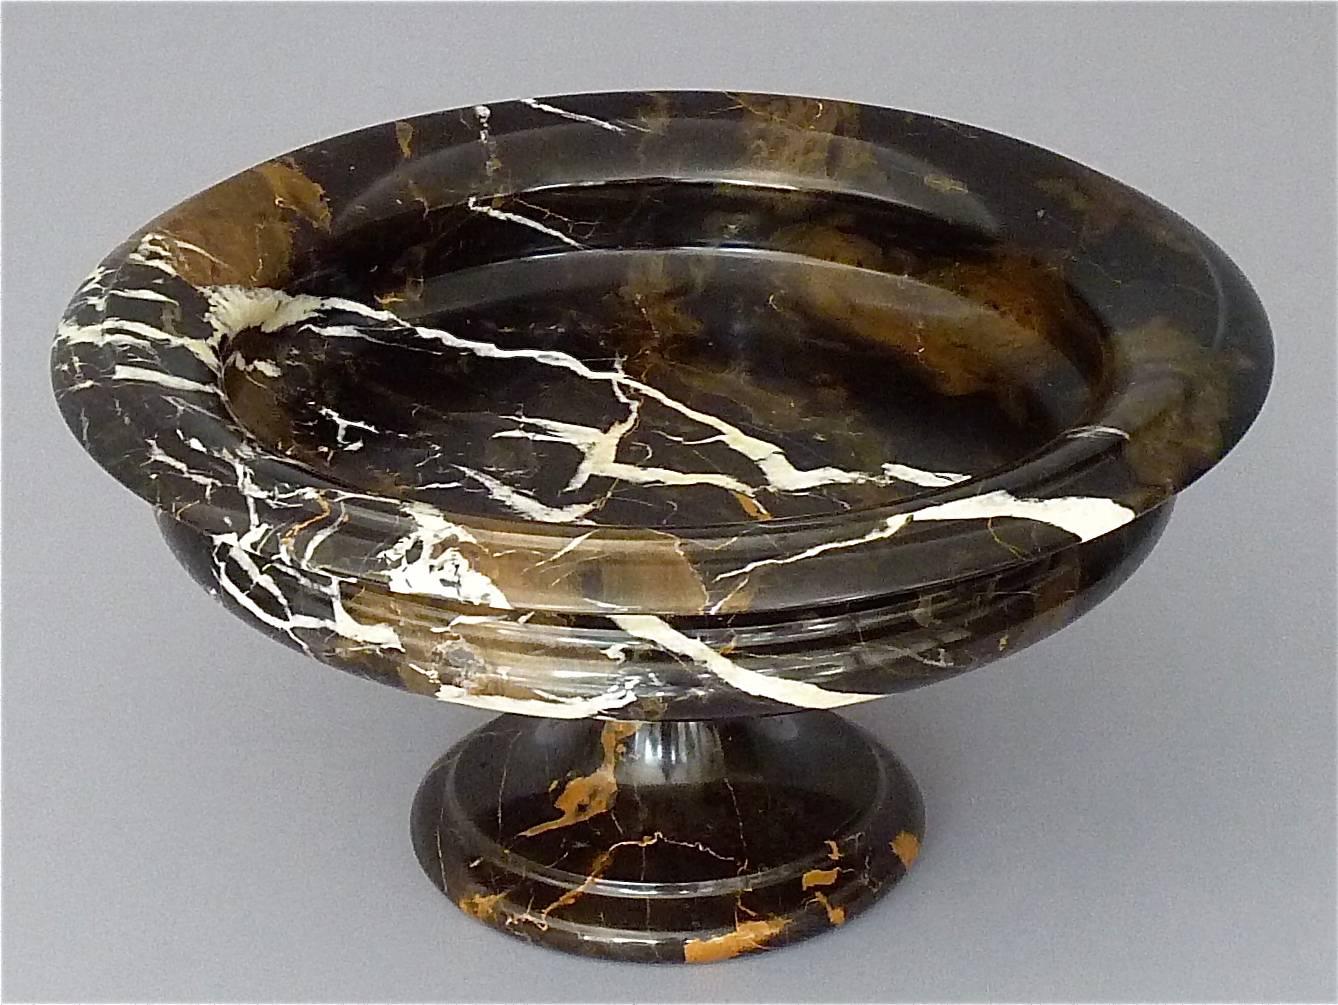 Beautiful antique neoclassical centerpiece or tazza which is a bowl mounted on a pedestal with veining in black, white and brown marble, Italy 19th century, circa 1880-1900. It is 19 cm / 7.48 inches tall and has a width of 36 cm / 14.17 inches. The